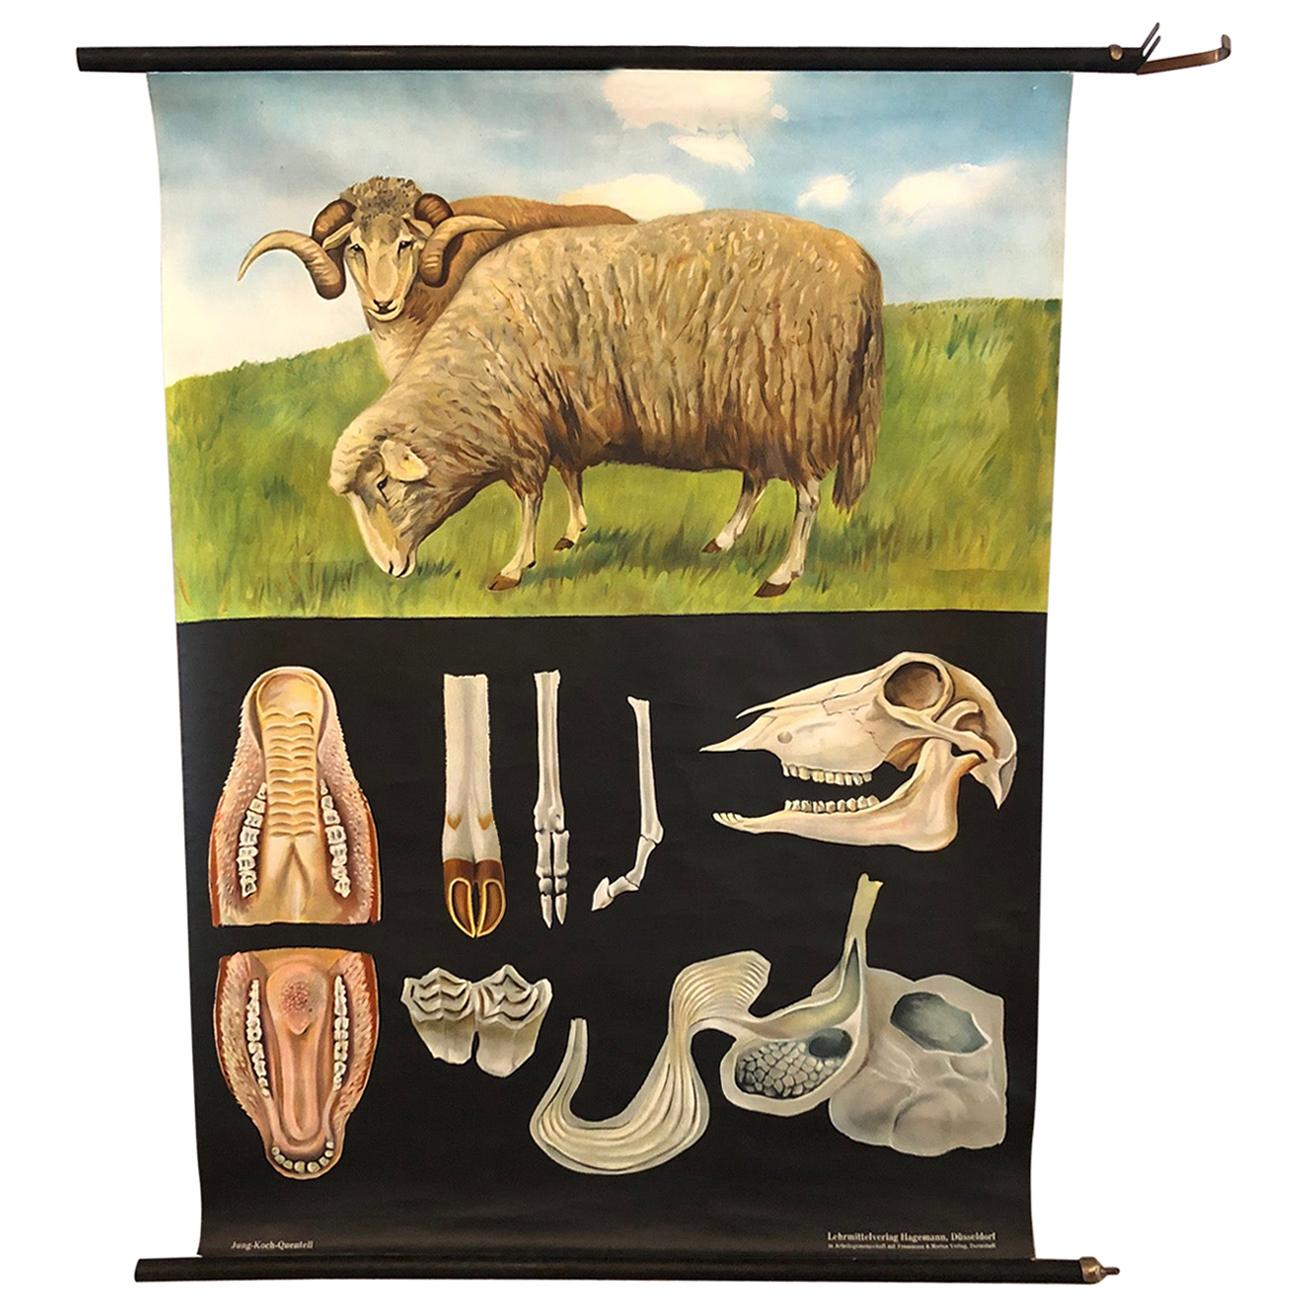 Jung-Koch-Quentell Educational Zoological Sheep Anatomy Chart For Sale